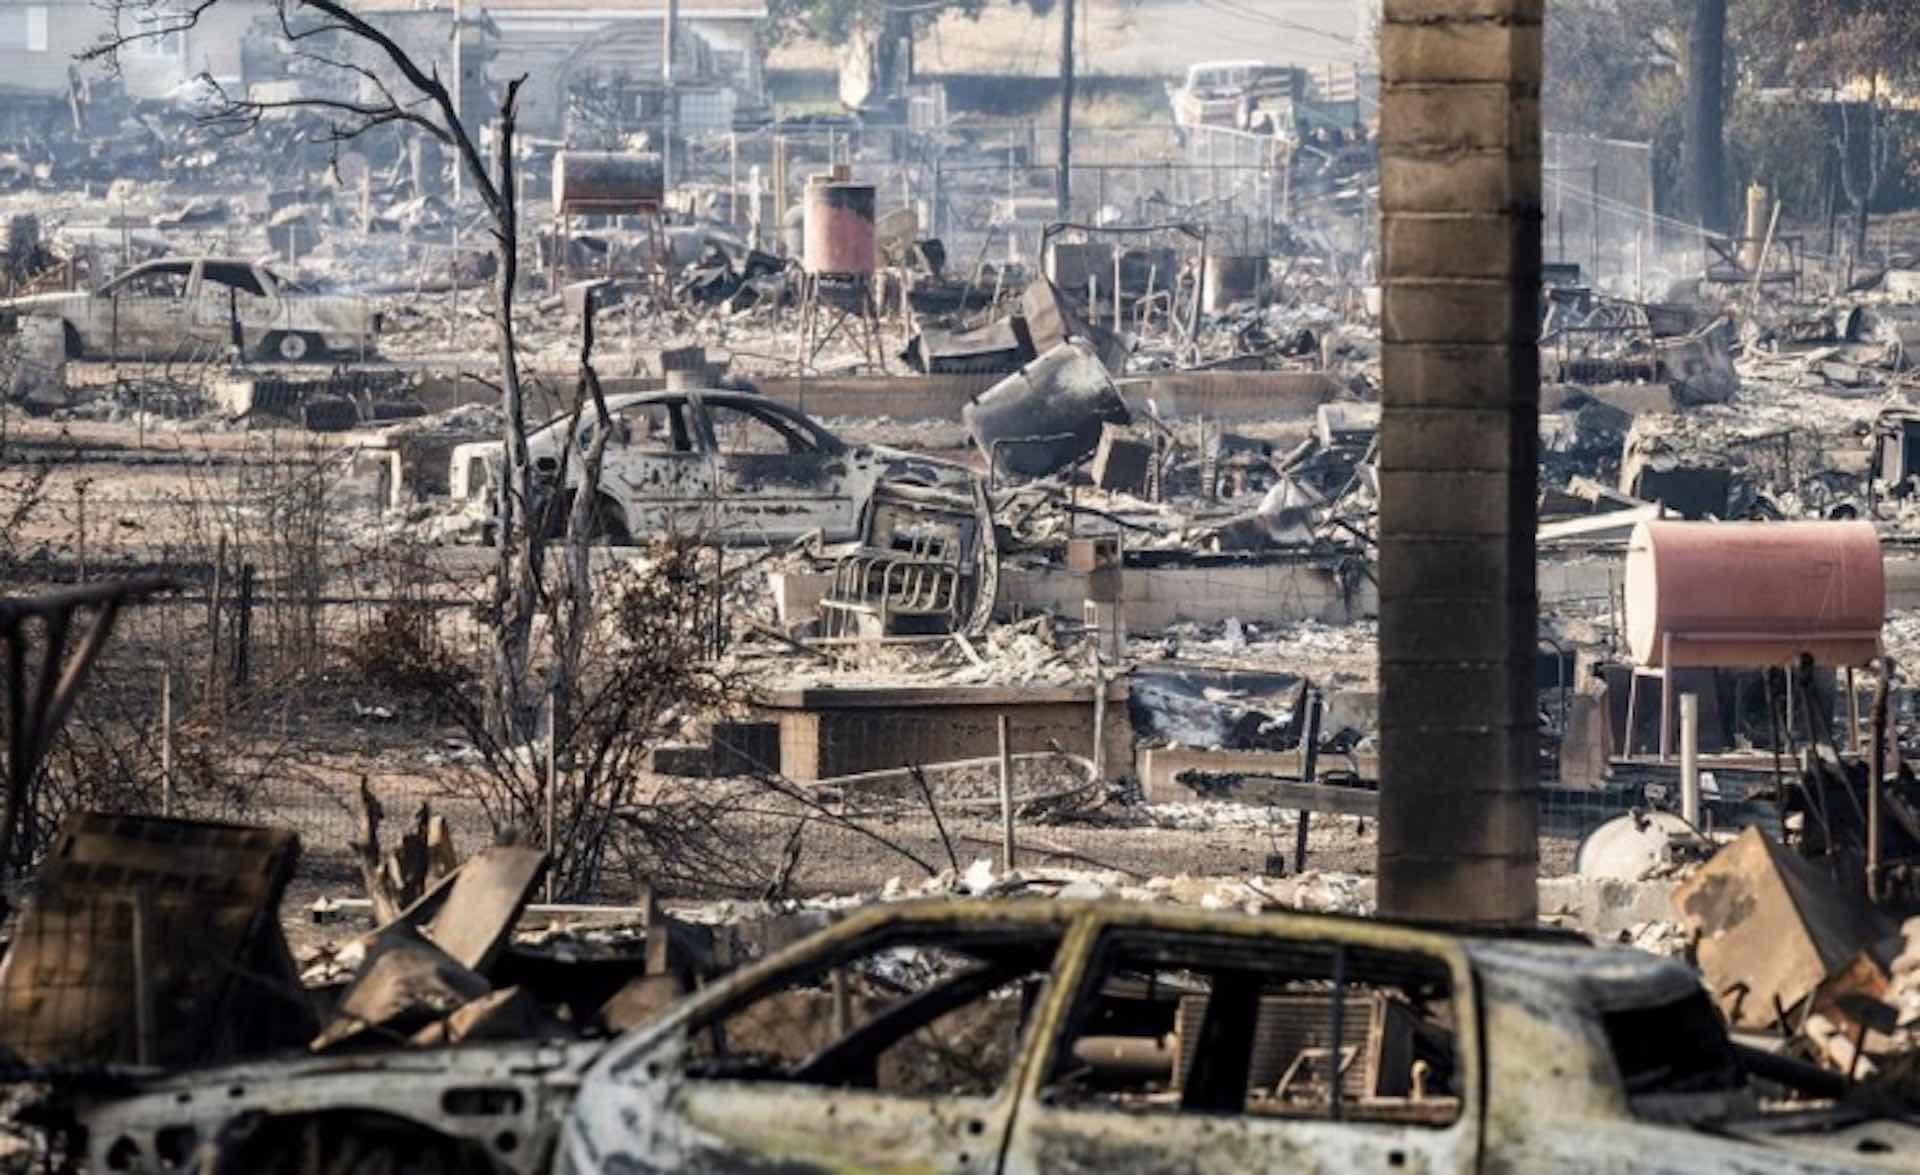 Wildfire destroys 100 California homes and other buildings